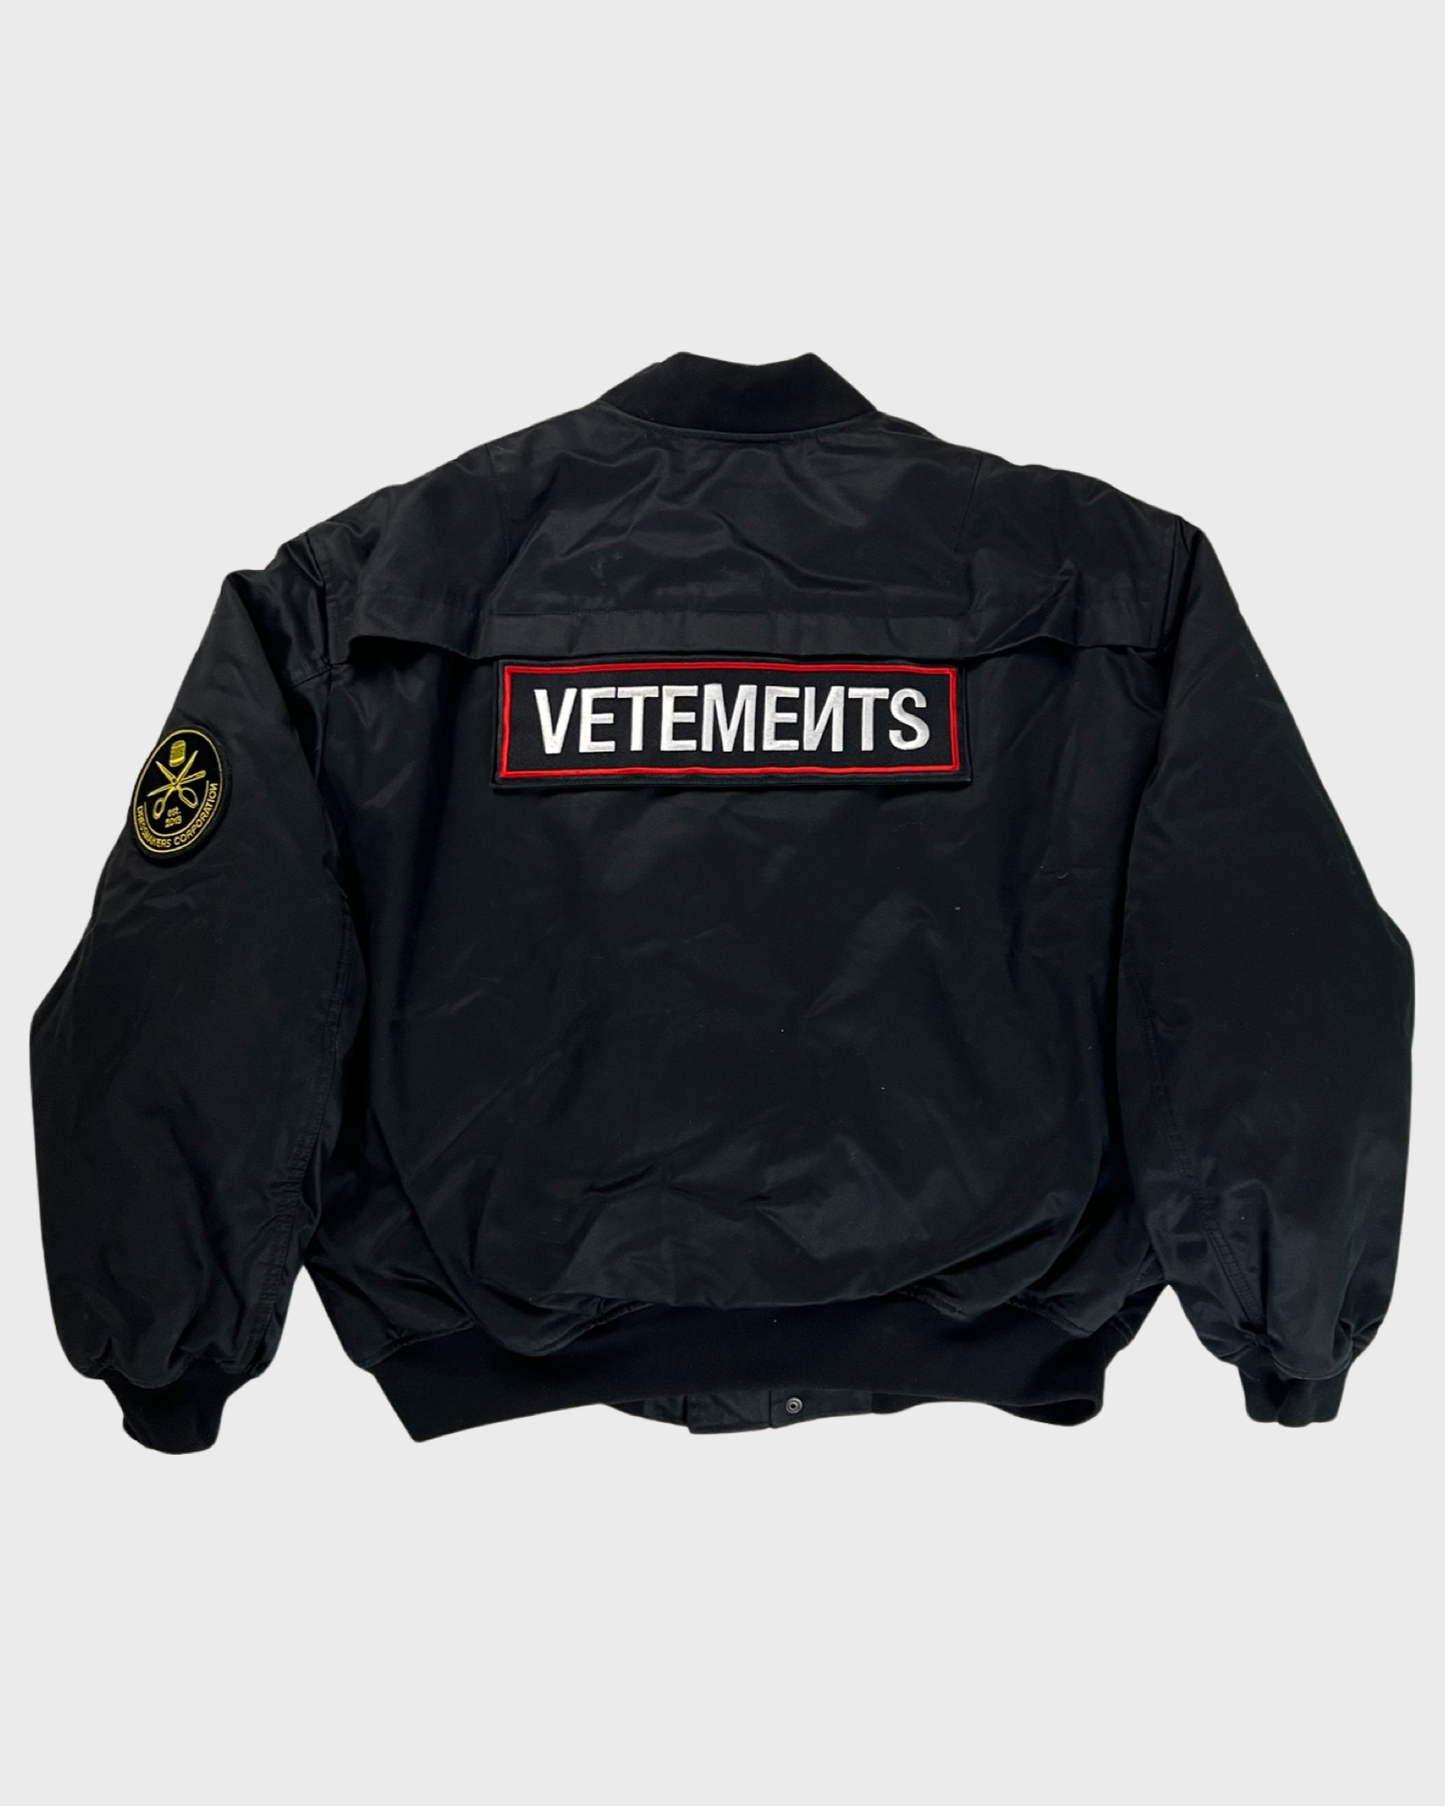 Vetements SS20 runway police security guard padded bomber Jacket SZ:S